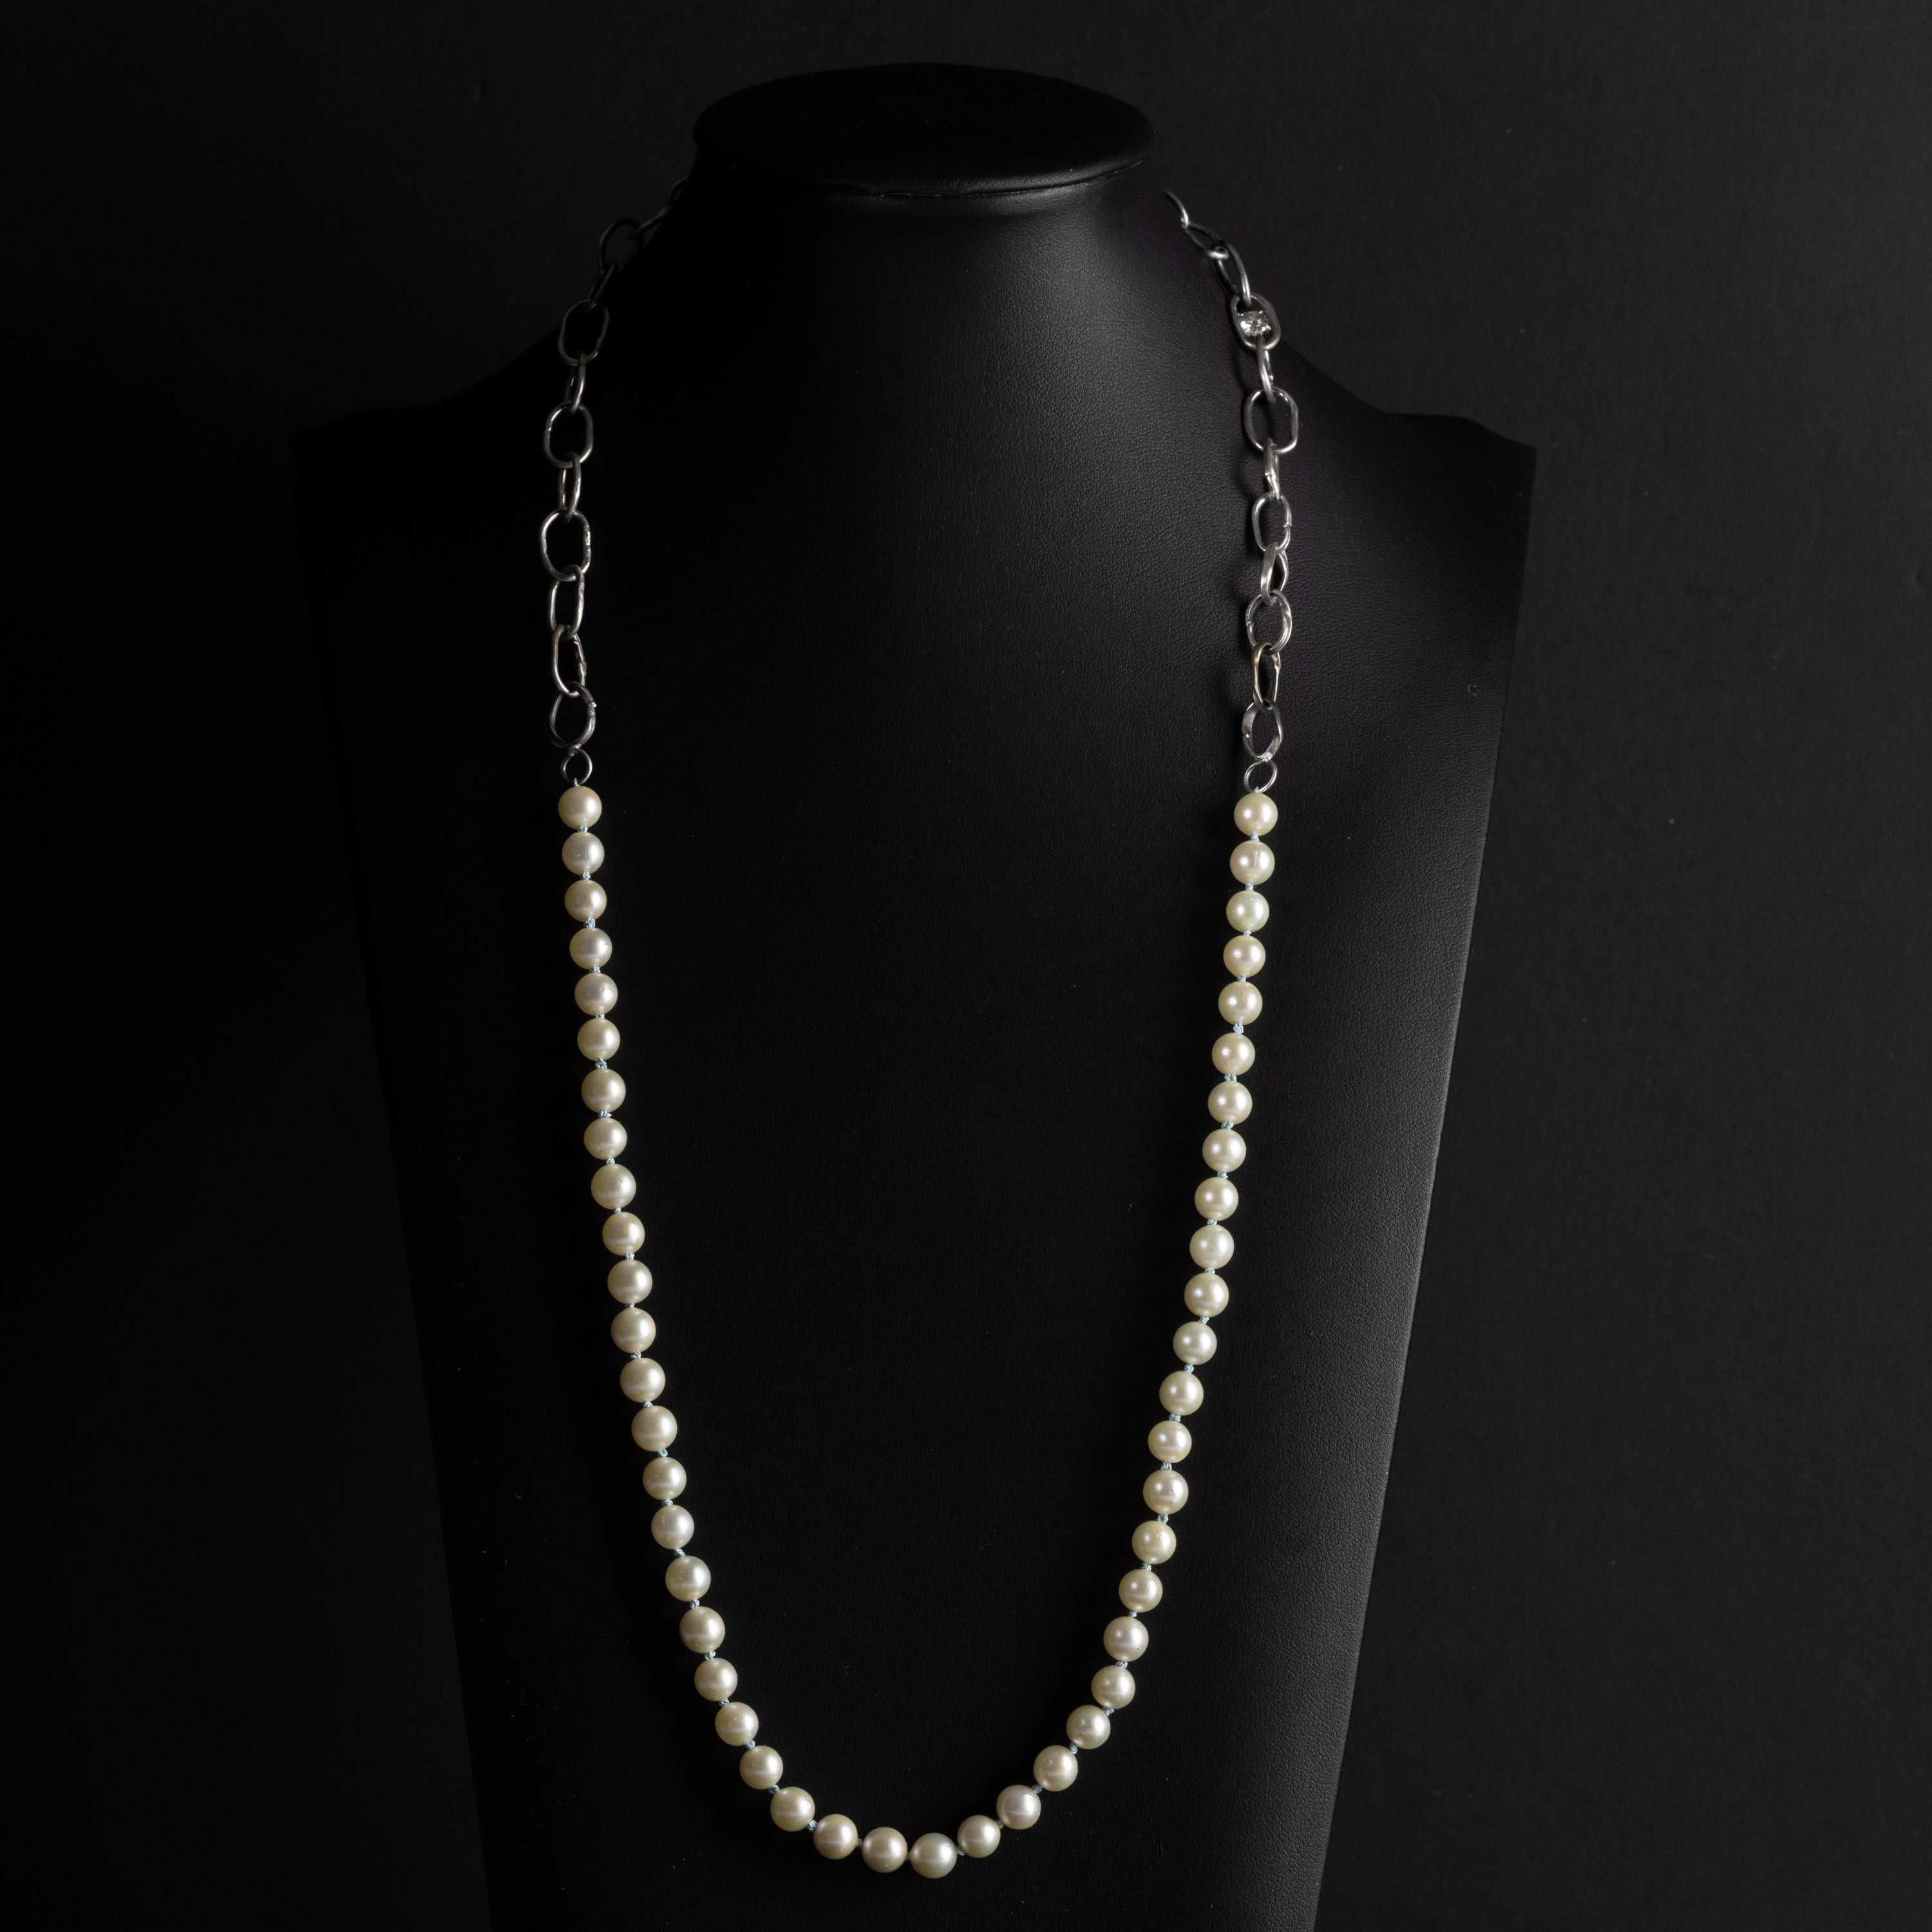 Unisex Akoya Pearl & Chain Necklace with Diamond New For Sale 1